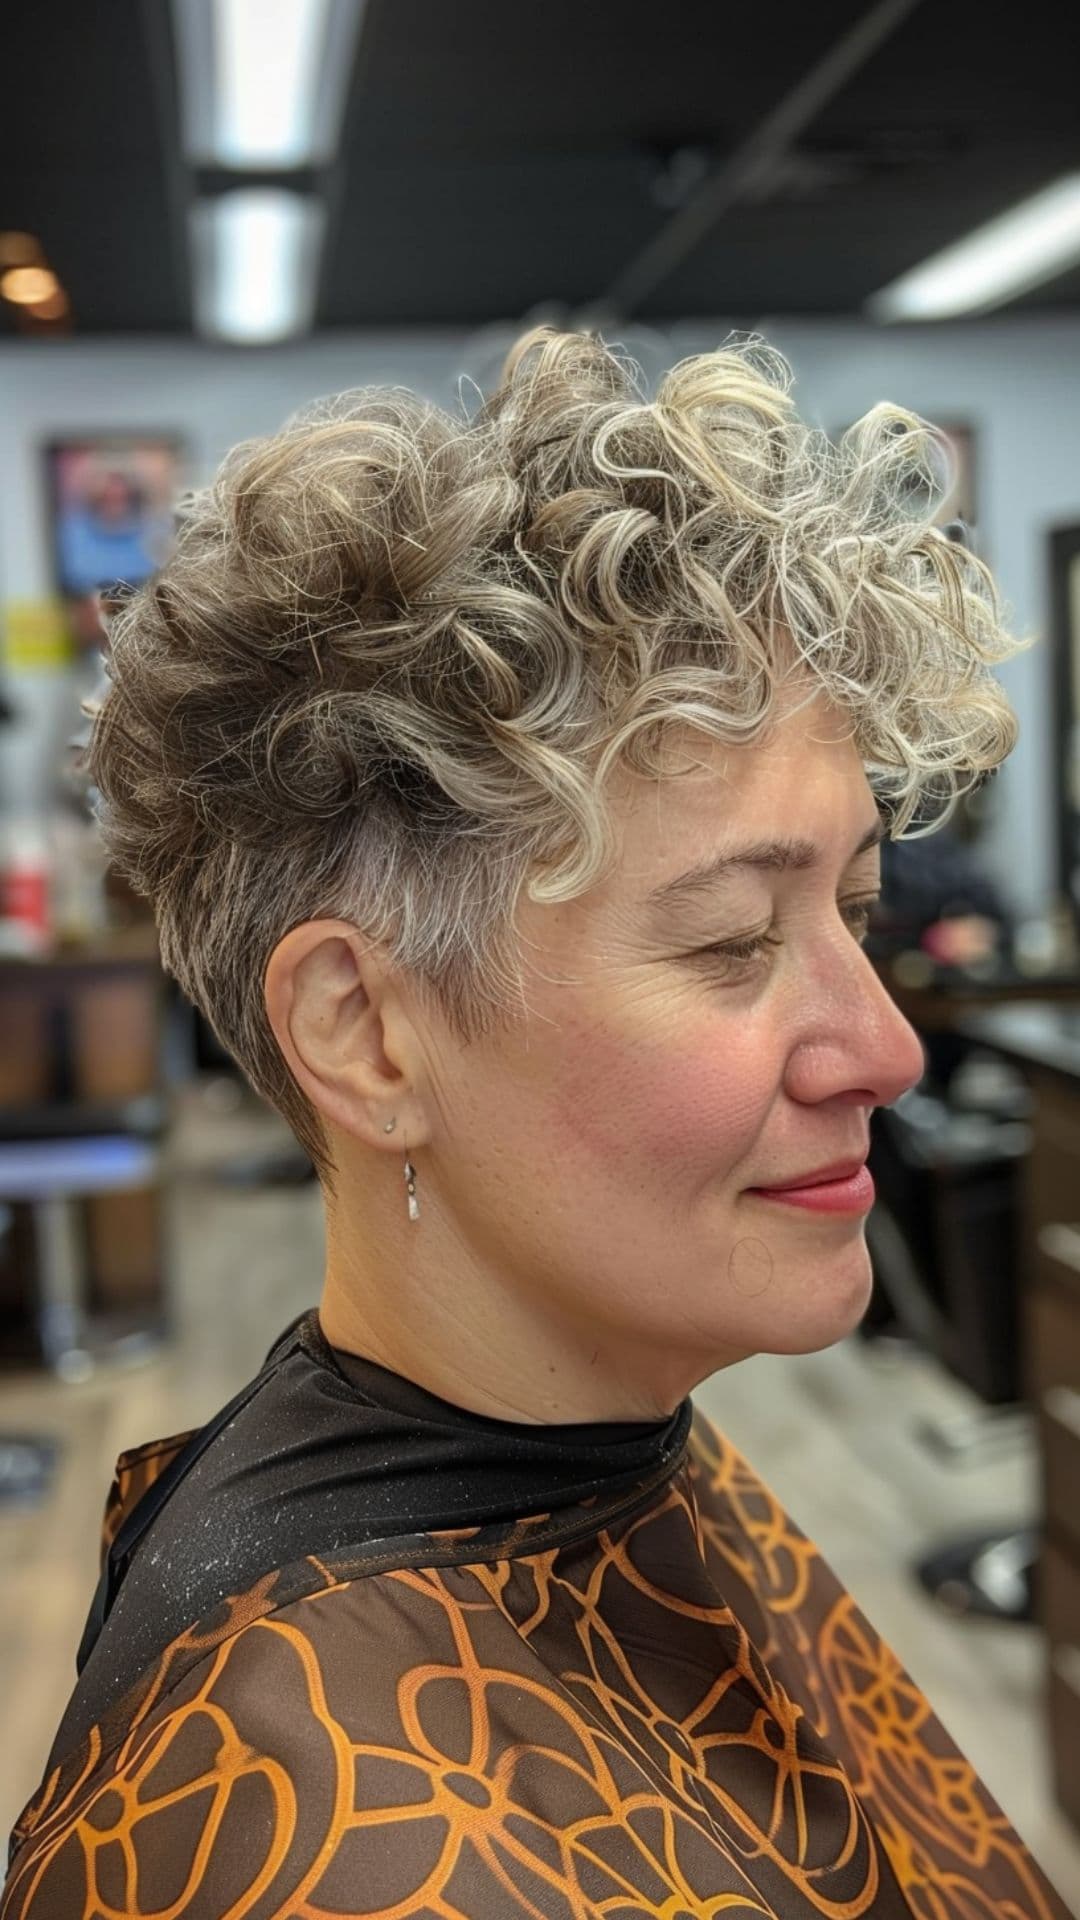 An old woman modelling a curly pixie with undercut.